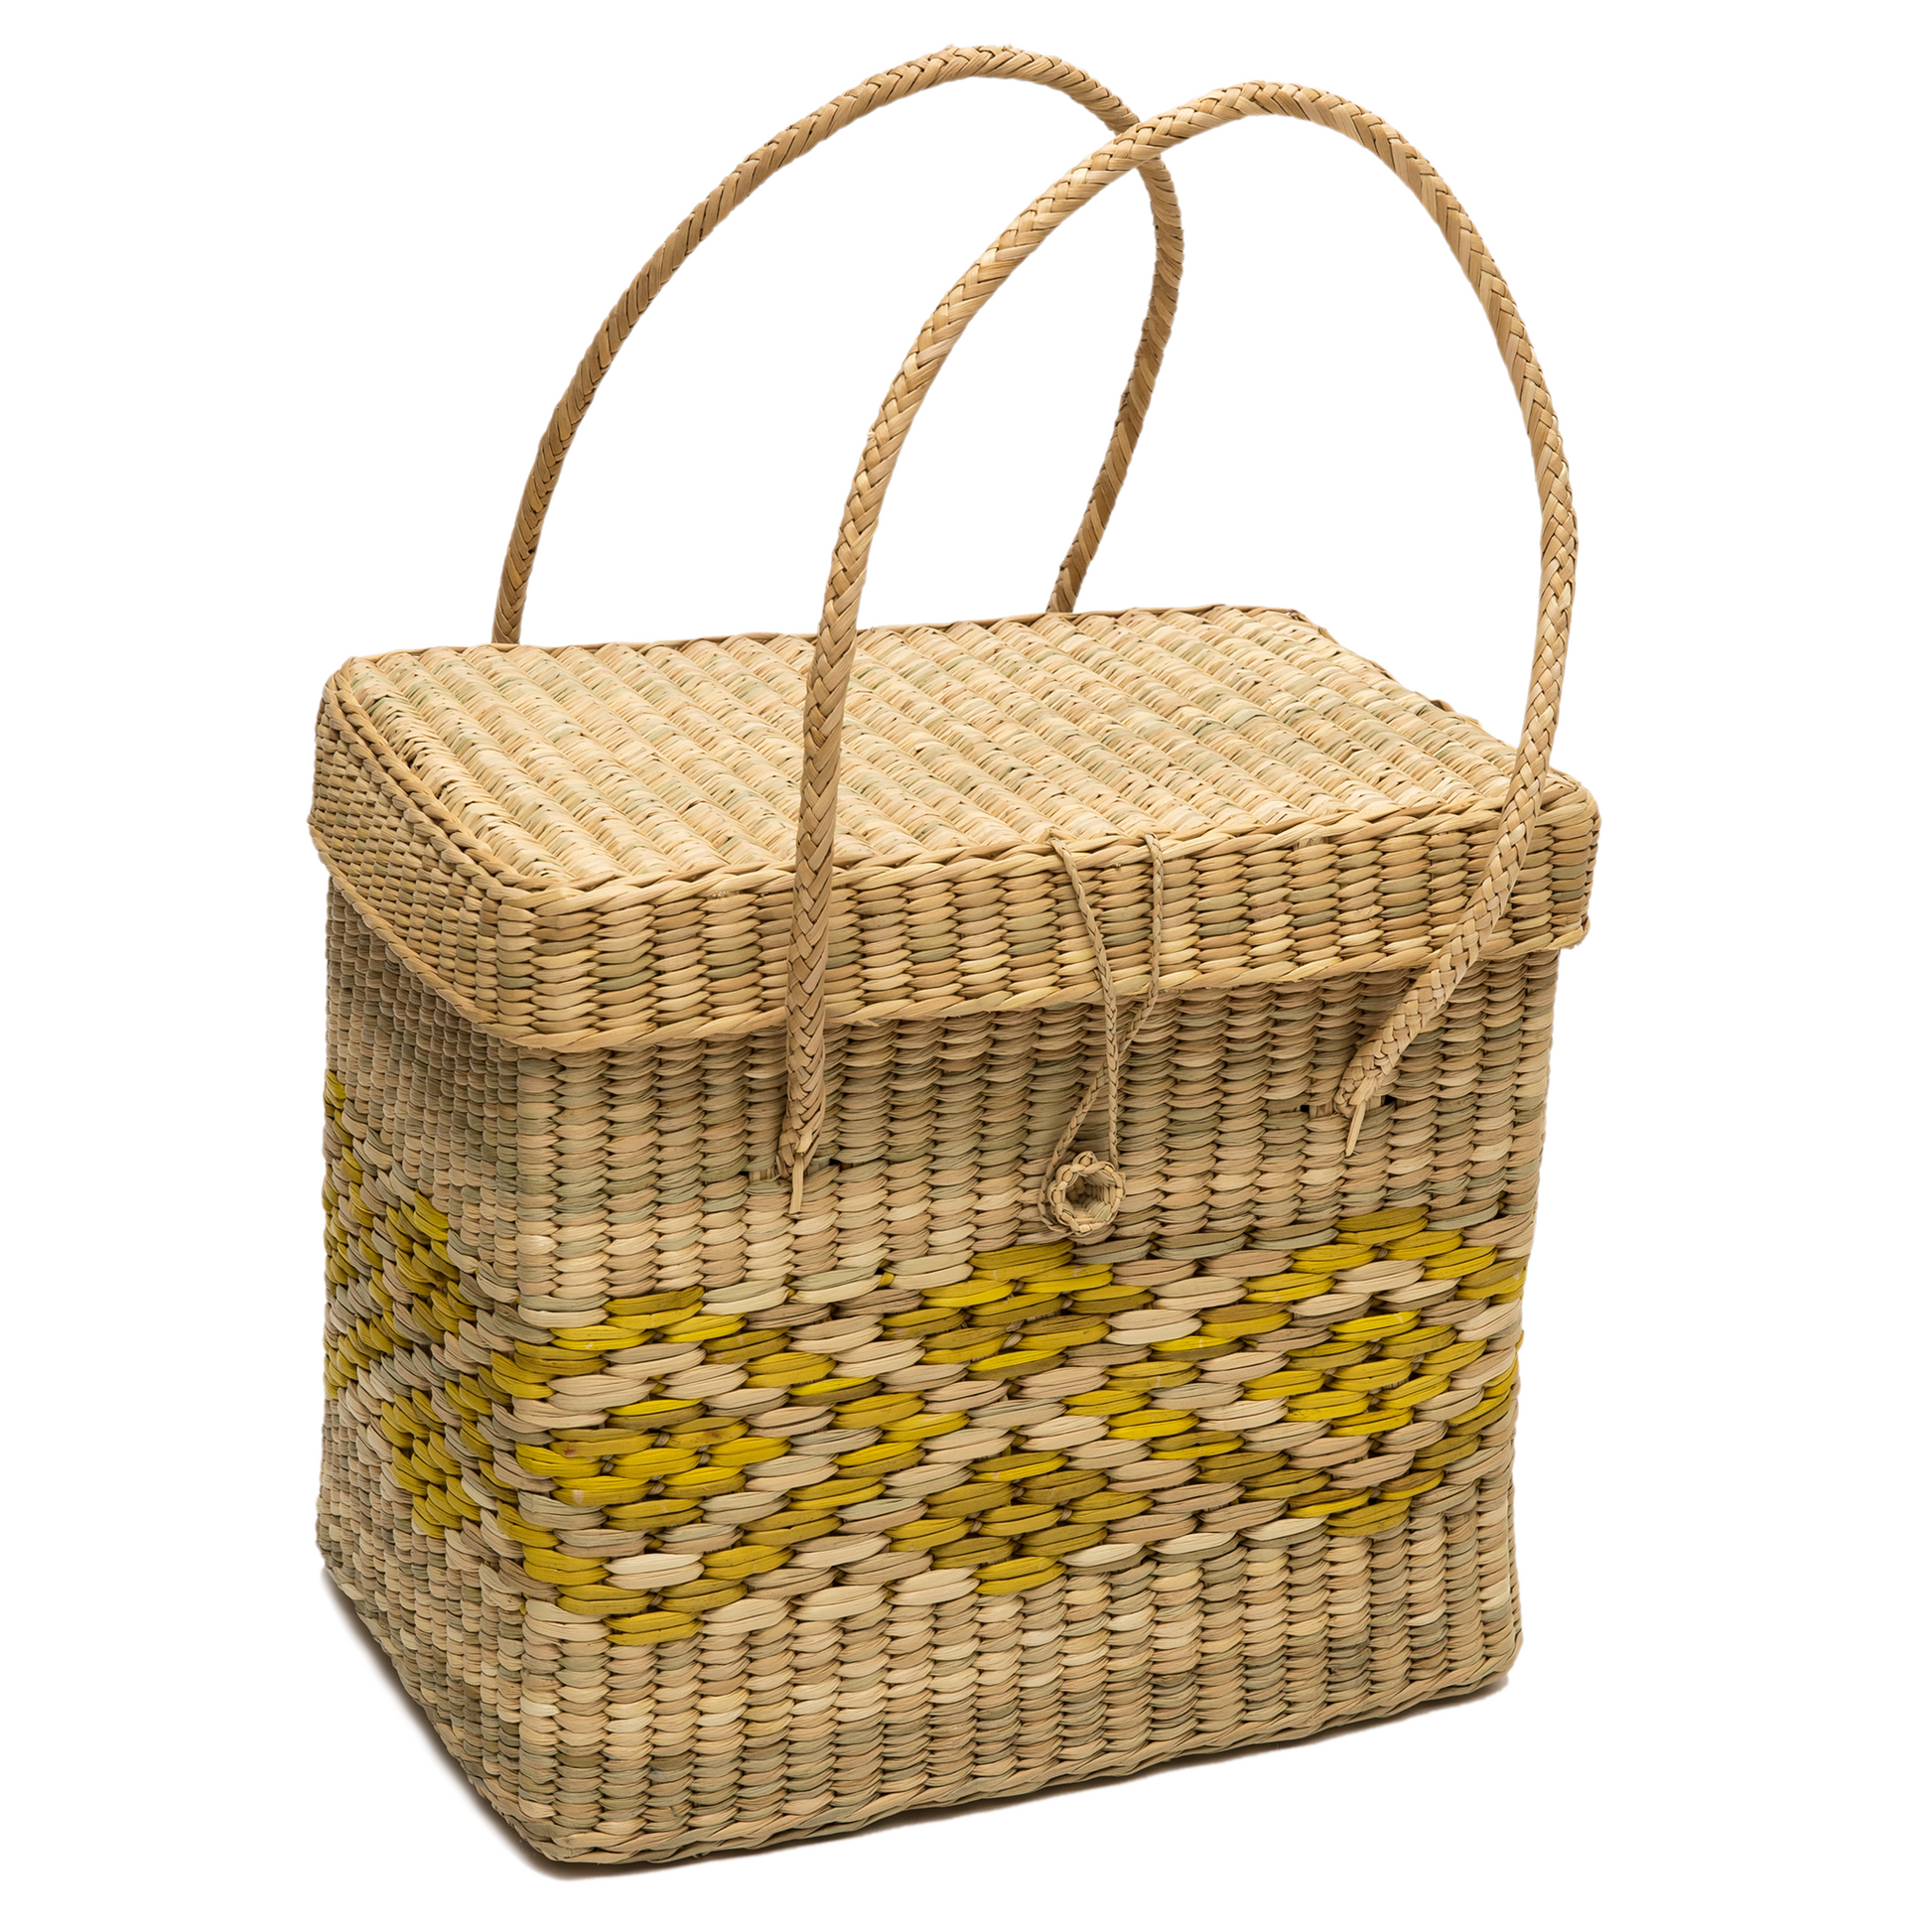 Intiearth straw picnic basket with hot pink motif